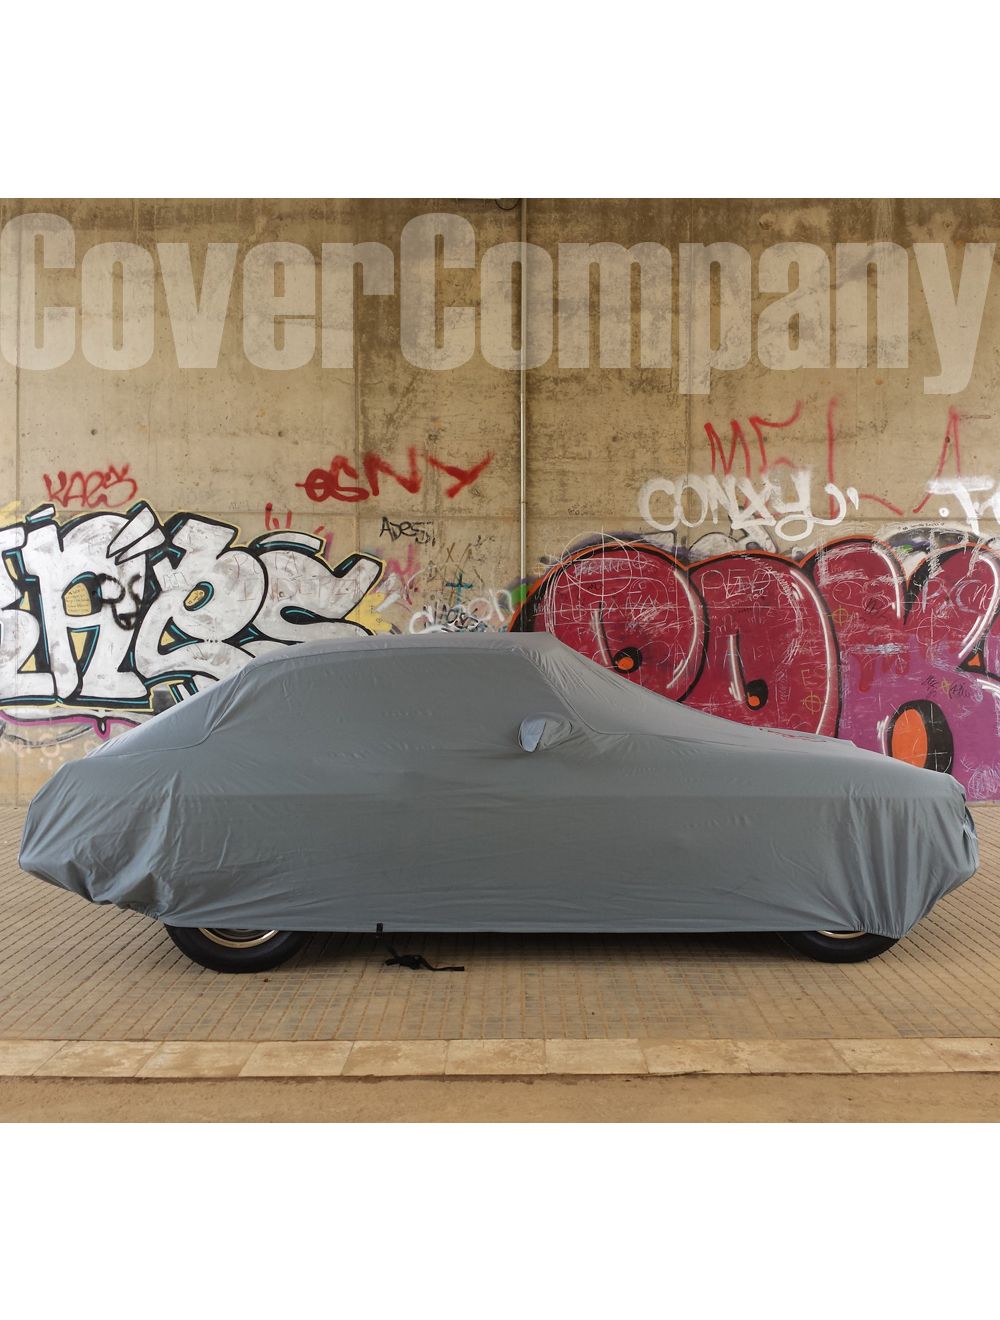  Car Cover Waterproof for MG ZS/ ZS EV/ MG EHS/ MG5 EV/ MG  Marvel R, Outdoor Car Covers Waterproof Breathable Large Car Cover with  Zipper, Custom Full Car Cover Dustproof Sun-Resistant (